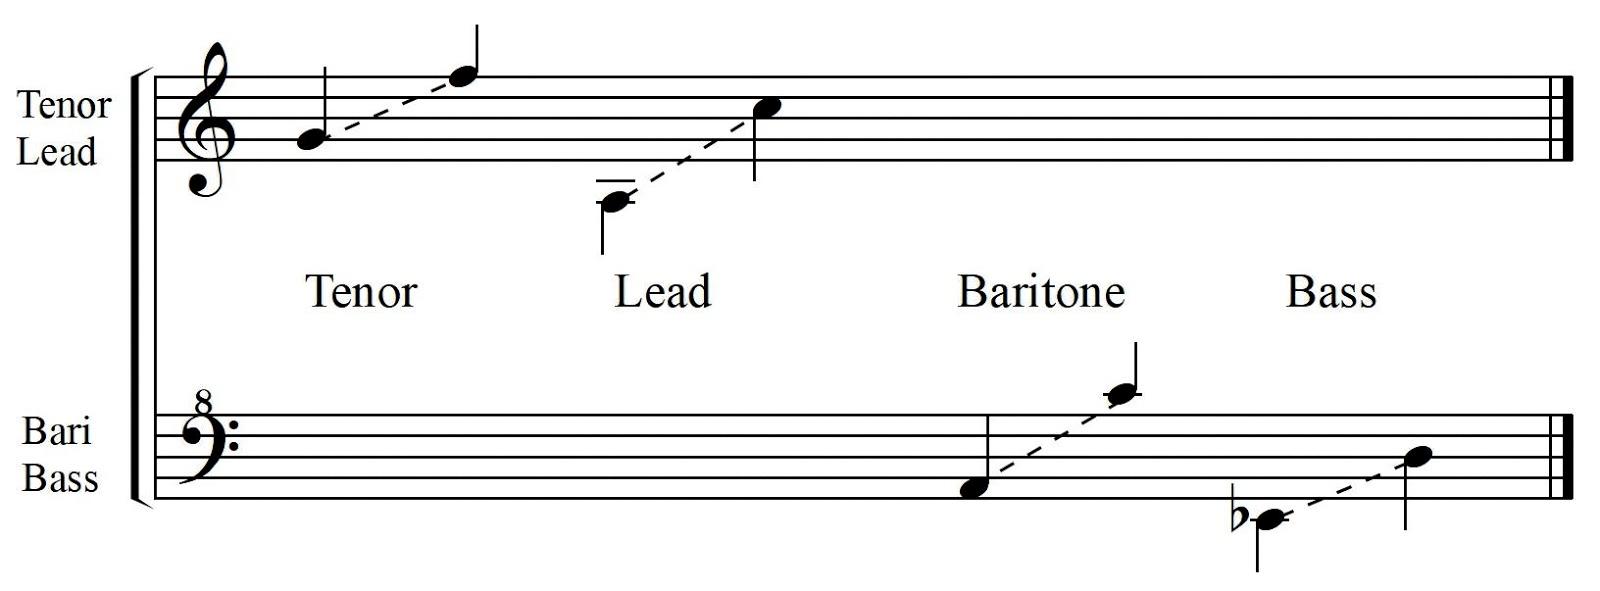 baritone is higher than ________.